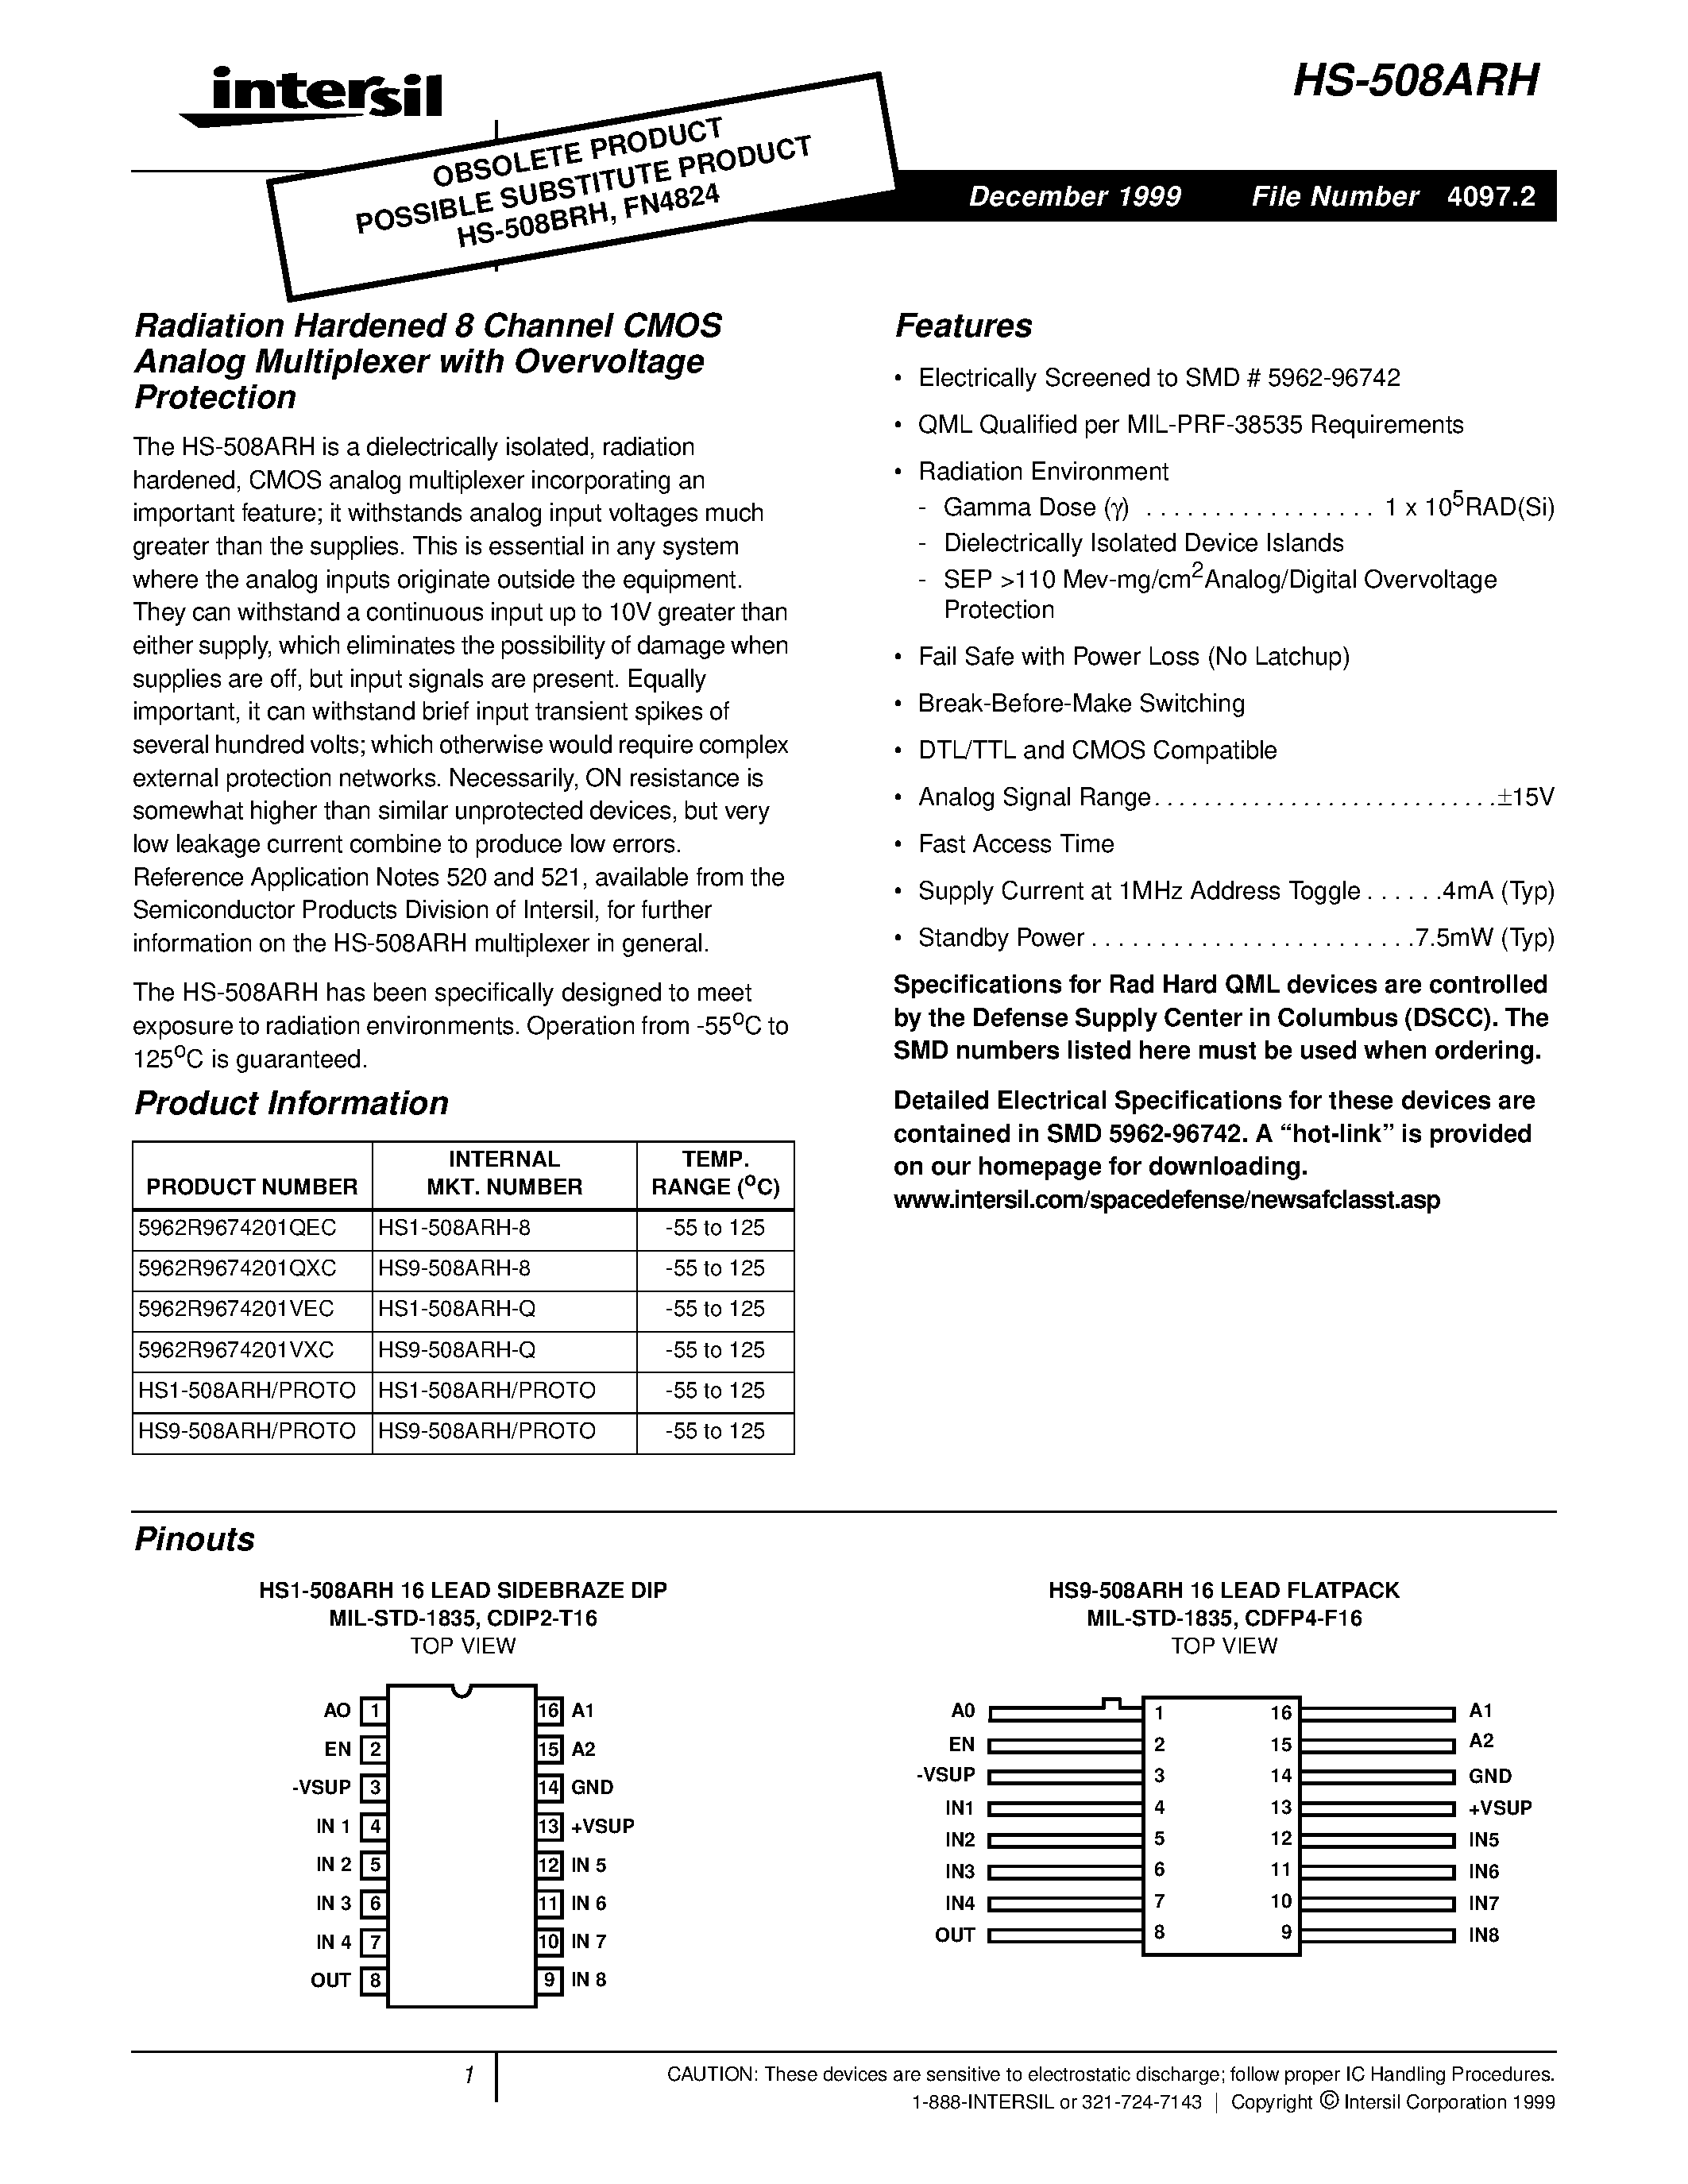 Datasheet HS9-508ARH-Q - Radiation Hardened 8 Channel CMOS Analog Multiplexer with Overvoltage Protection page 1